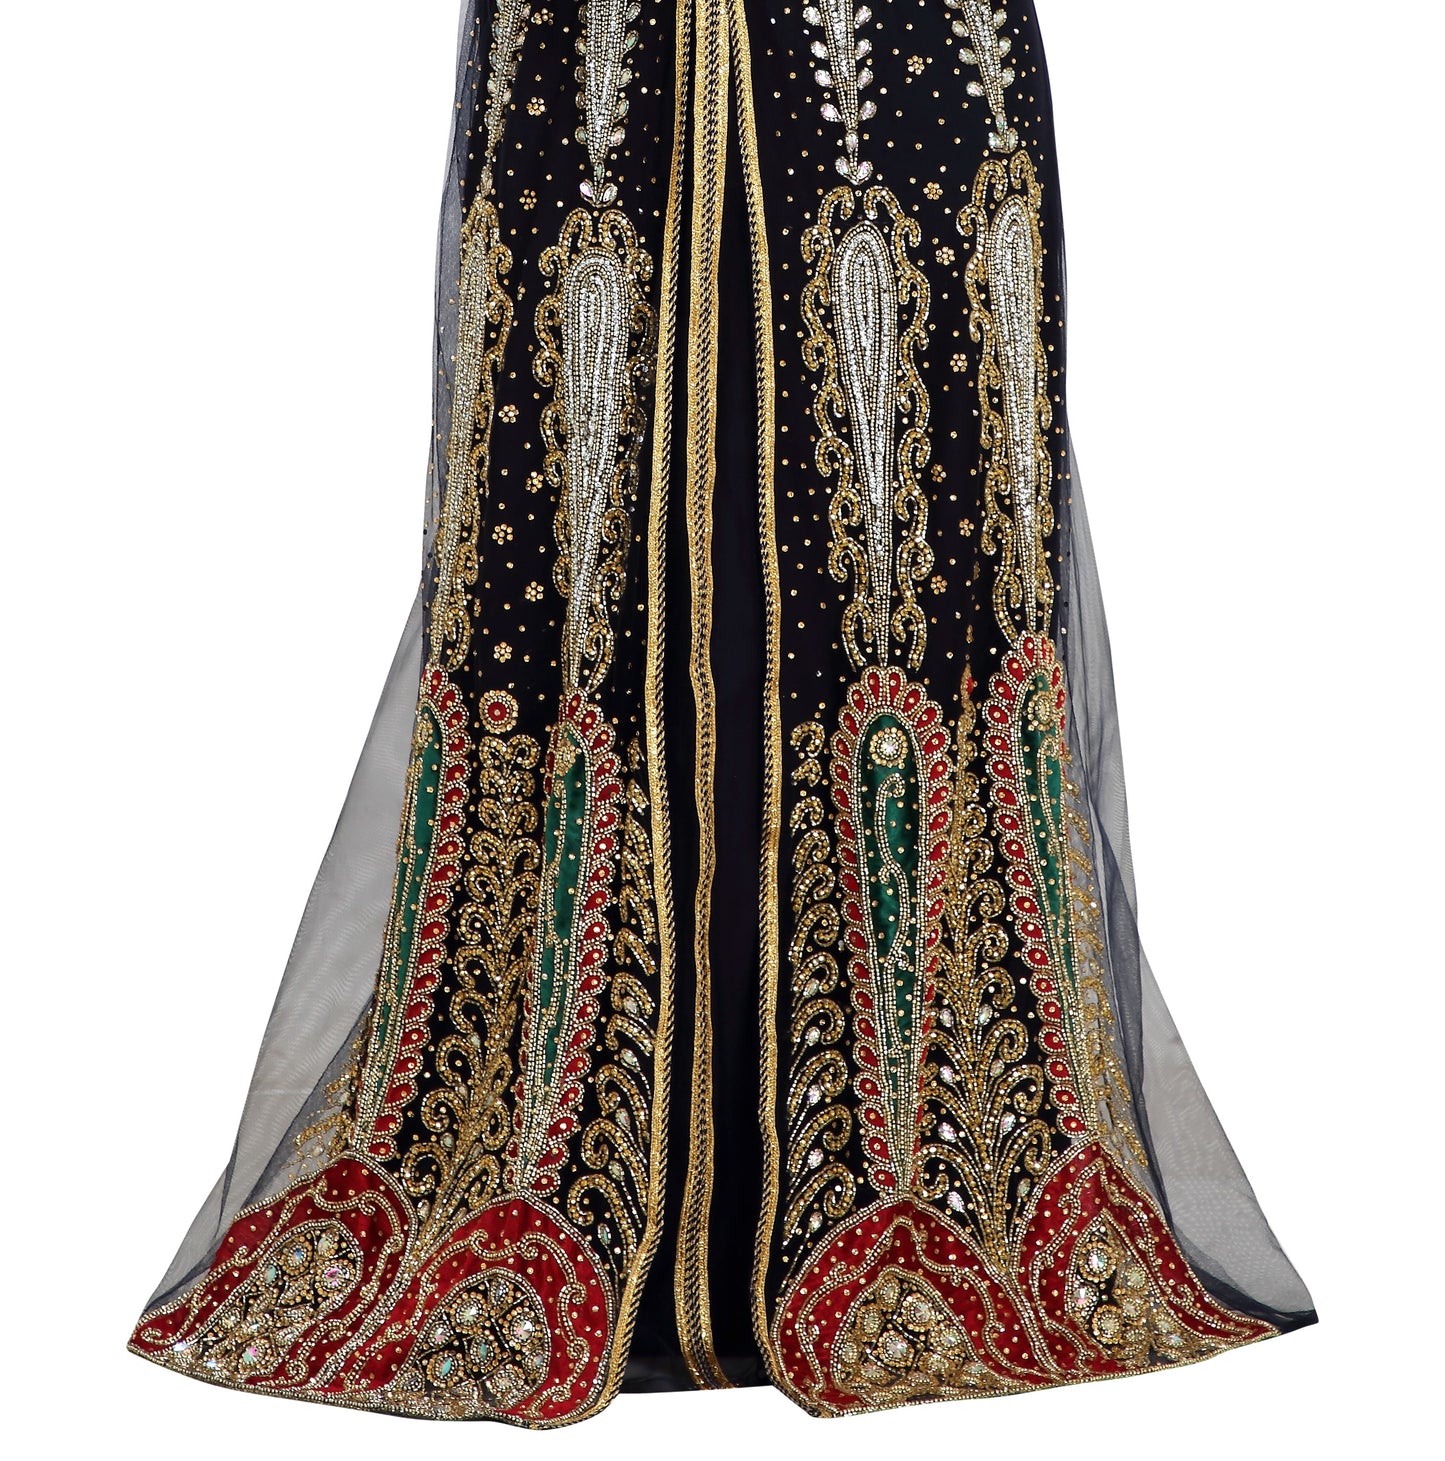 French Tackchita Gown with Soiree Embroidered Robe - Maxim Creation